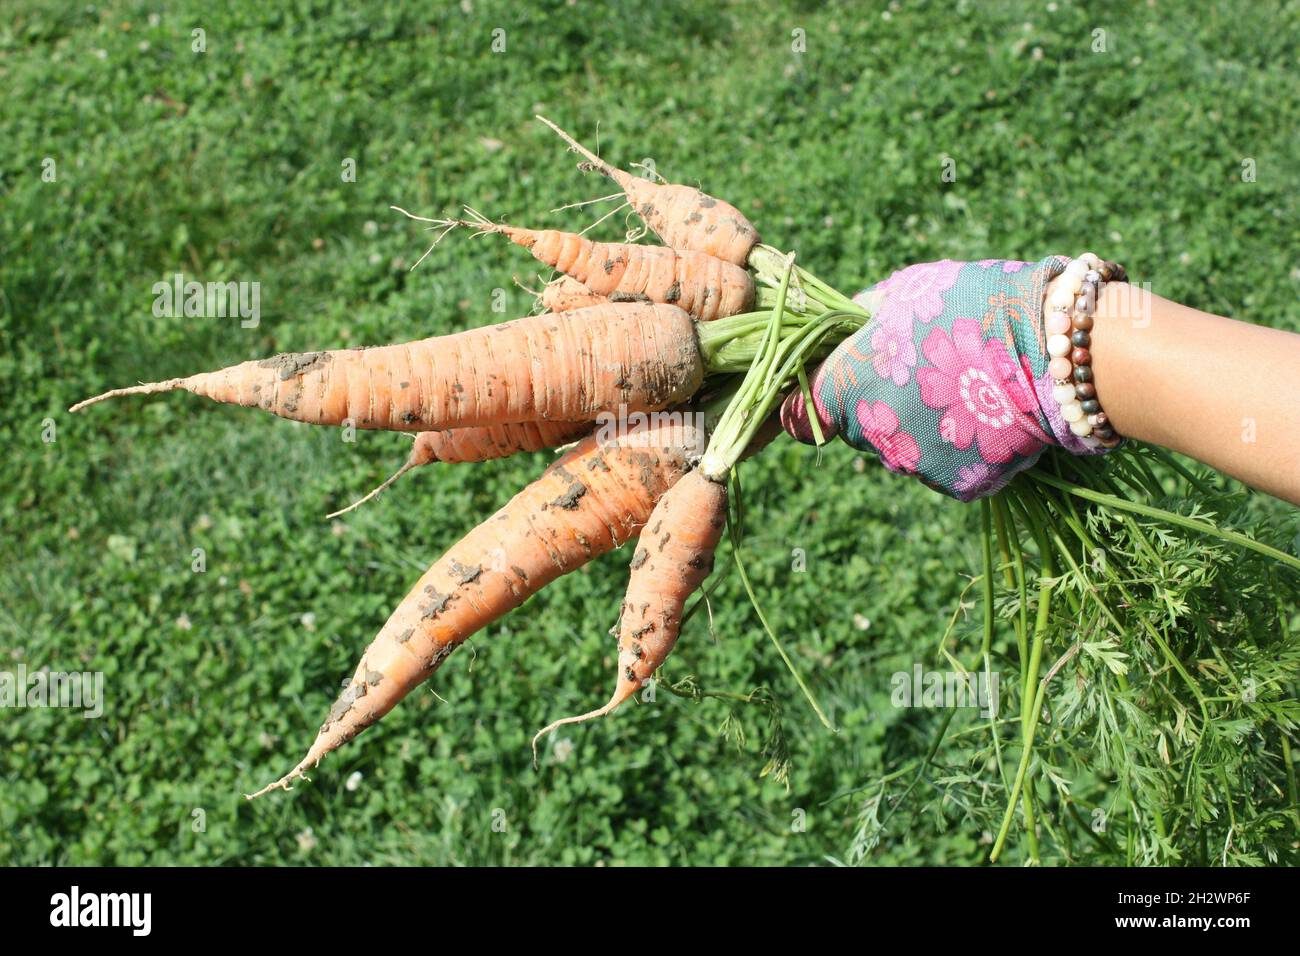 A closeup shot of a bunch of freshly picked carrots in hand Stock Photo